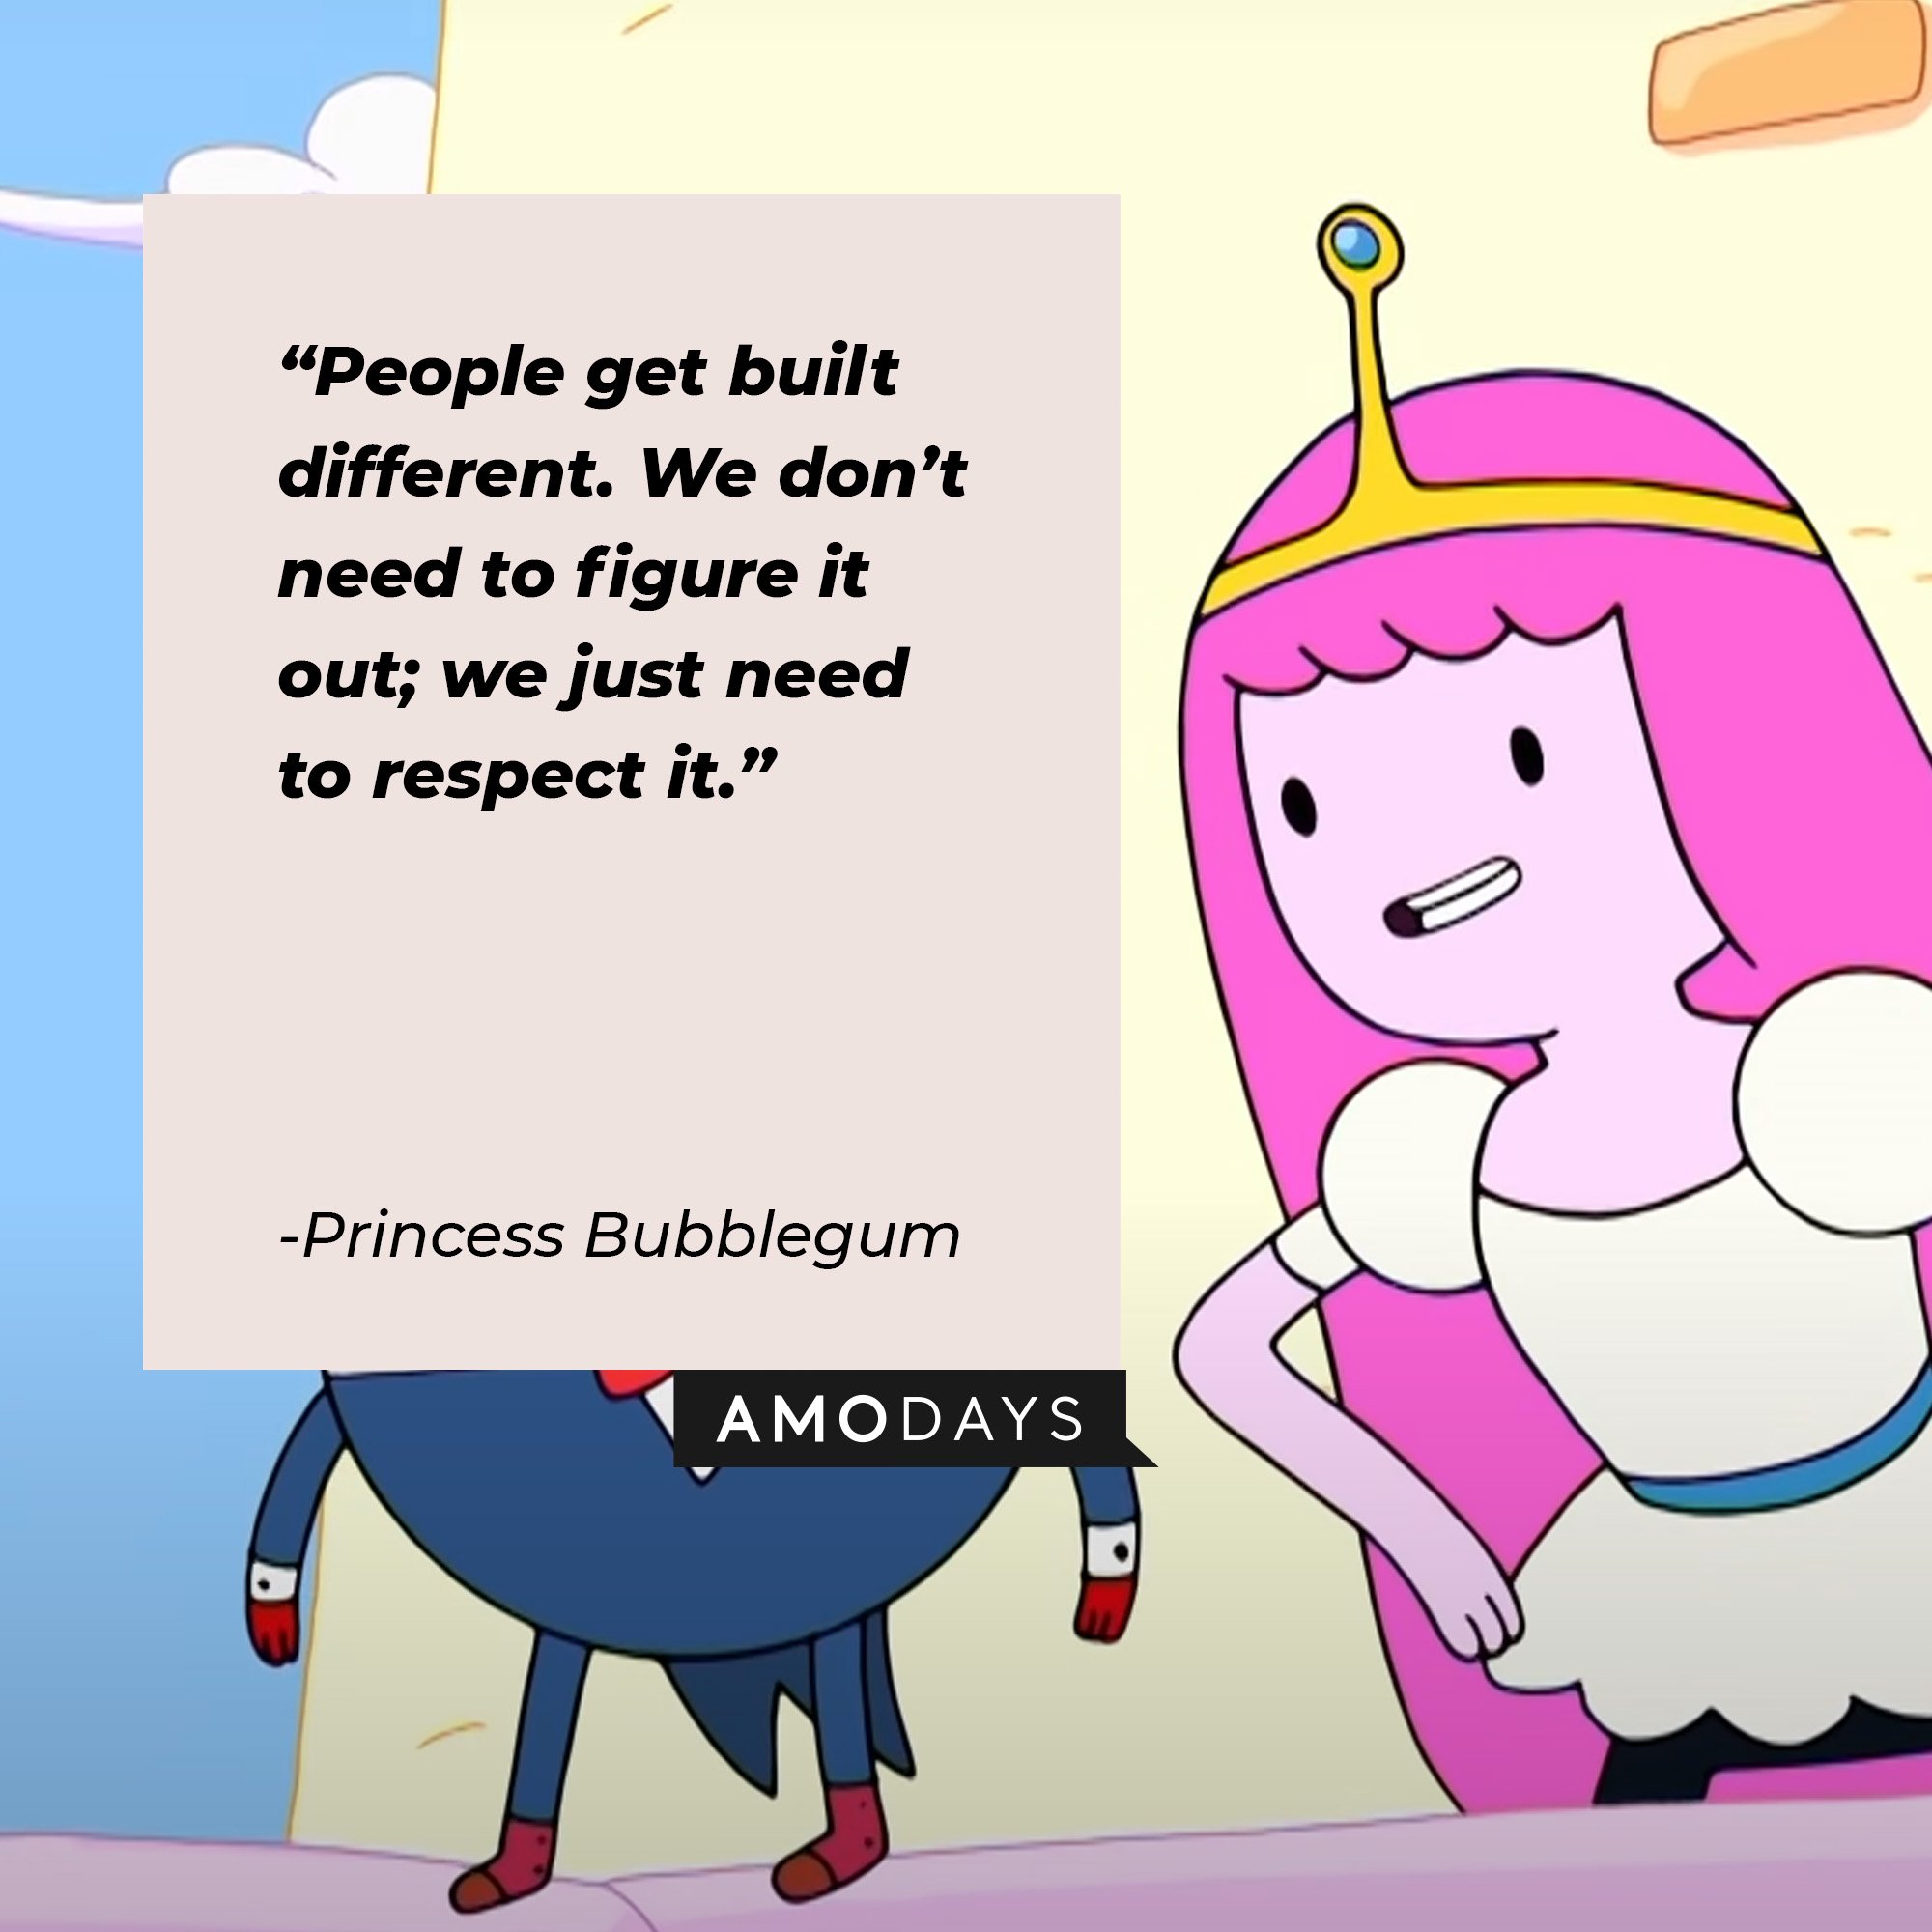  Princess Bubblegums’ quote: “People get built different. We don’t need to figure it out; we just need to respect it.” |  Image: AmoDays